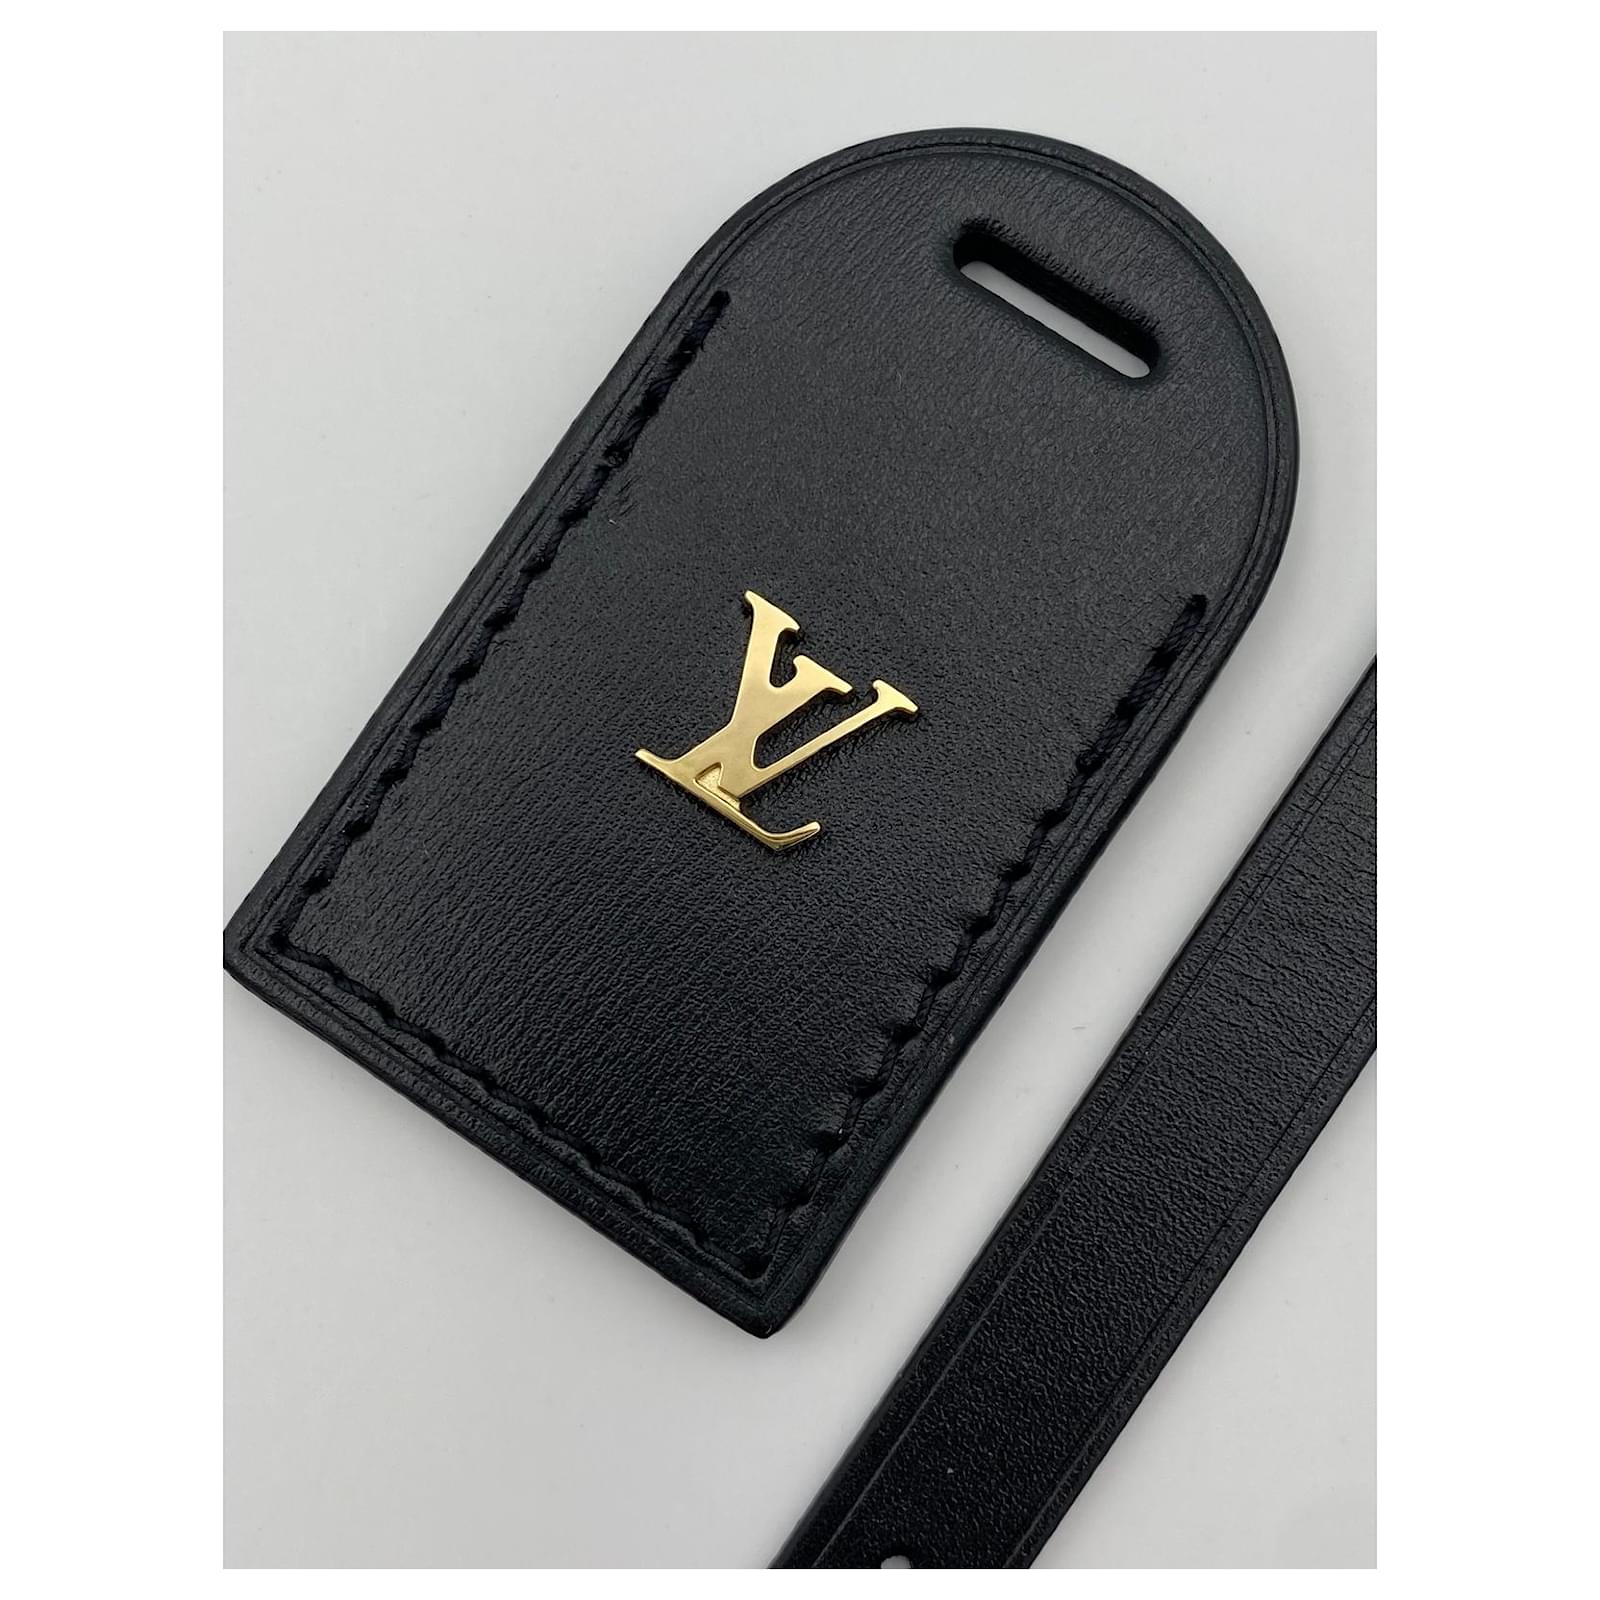 Louis Vuitton Black Leather Luggage Tag Bag Charm 7lv613 – Bagriculture